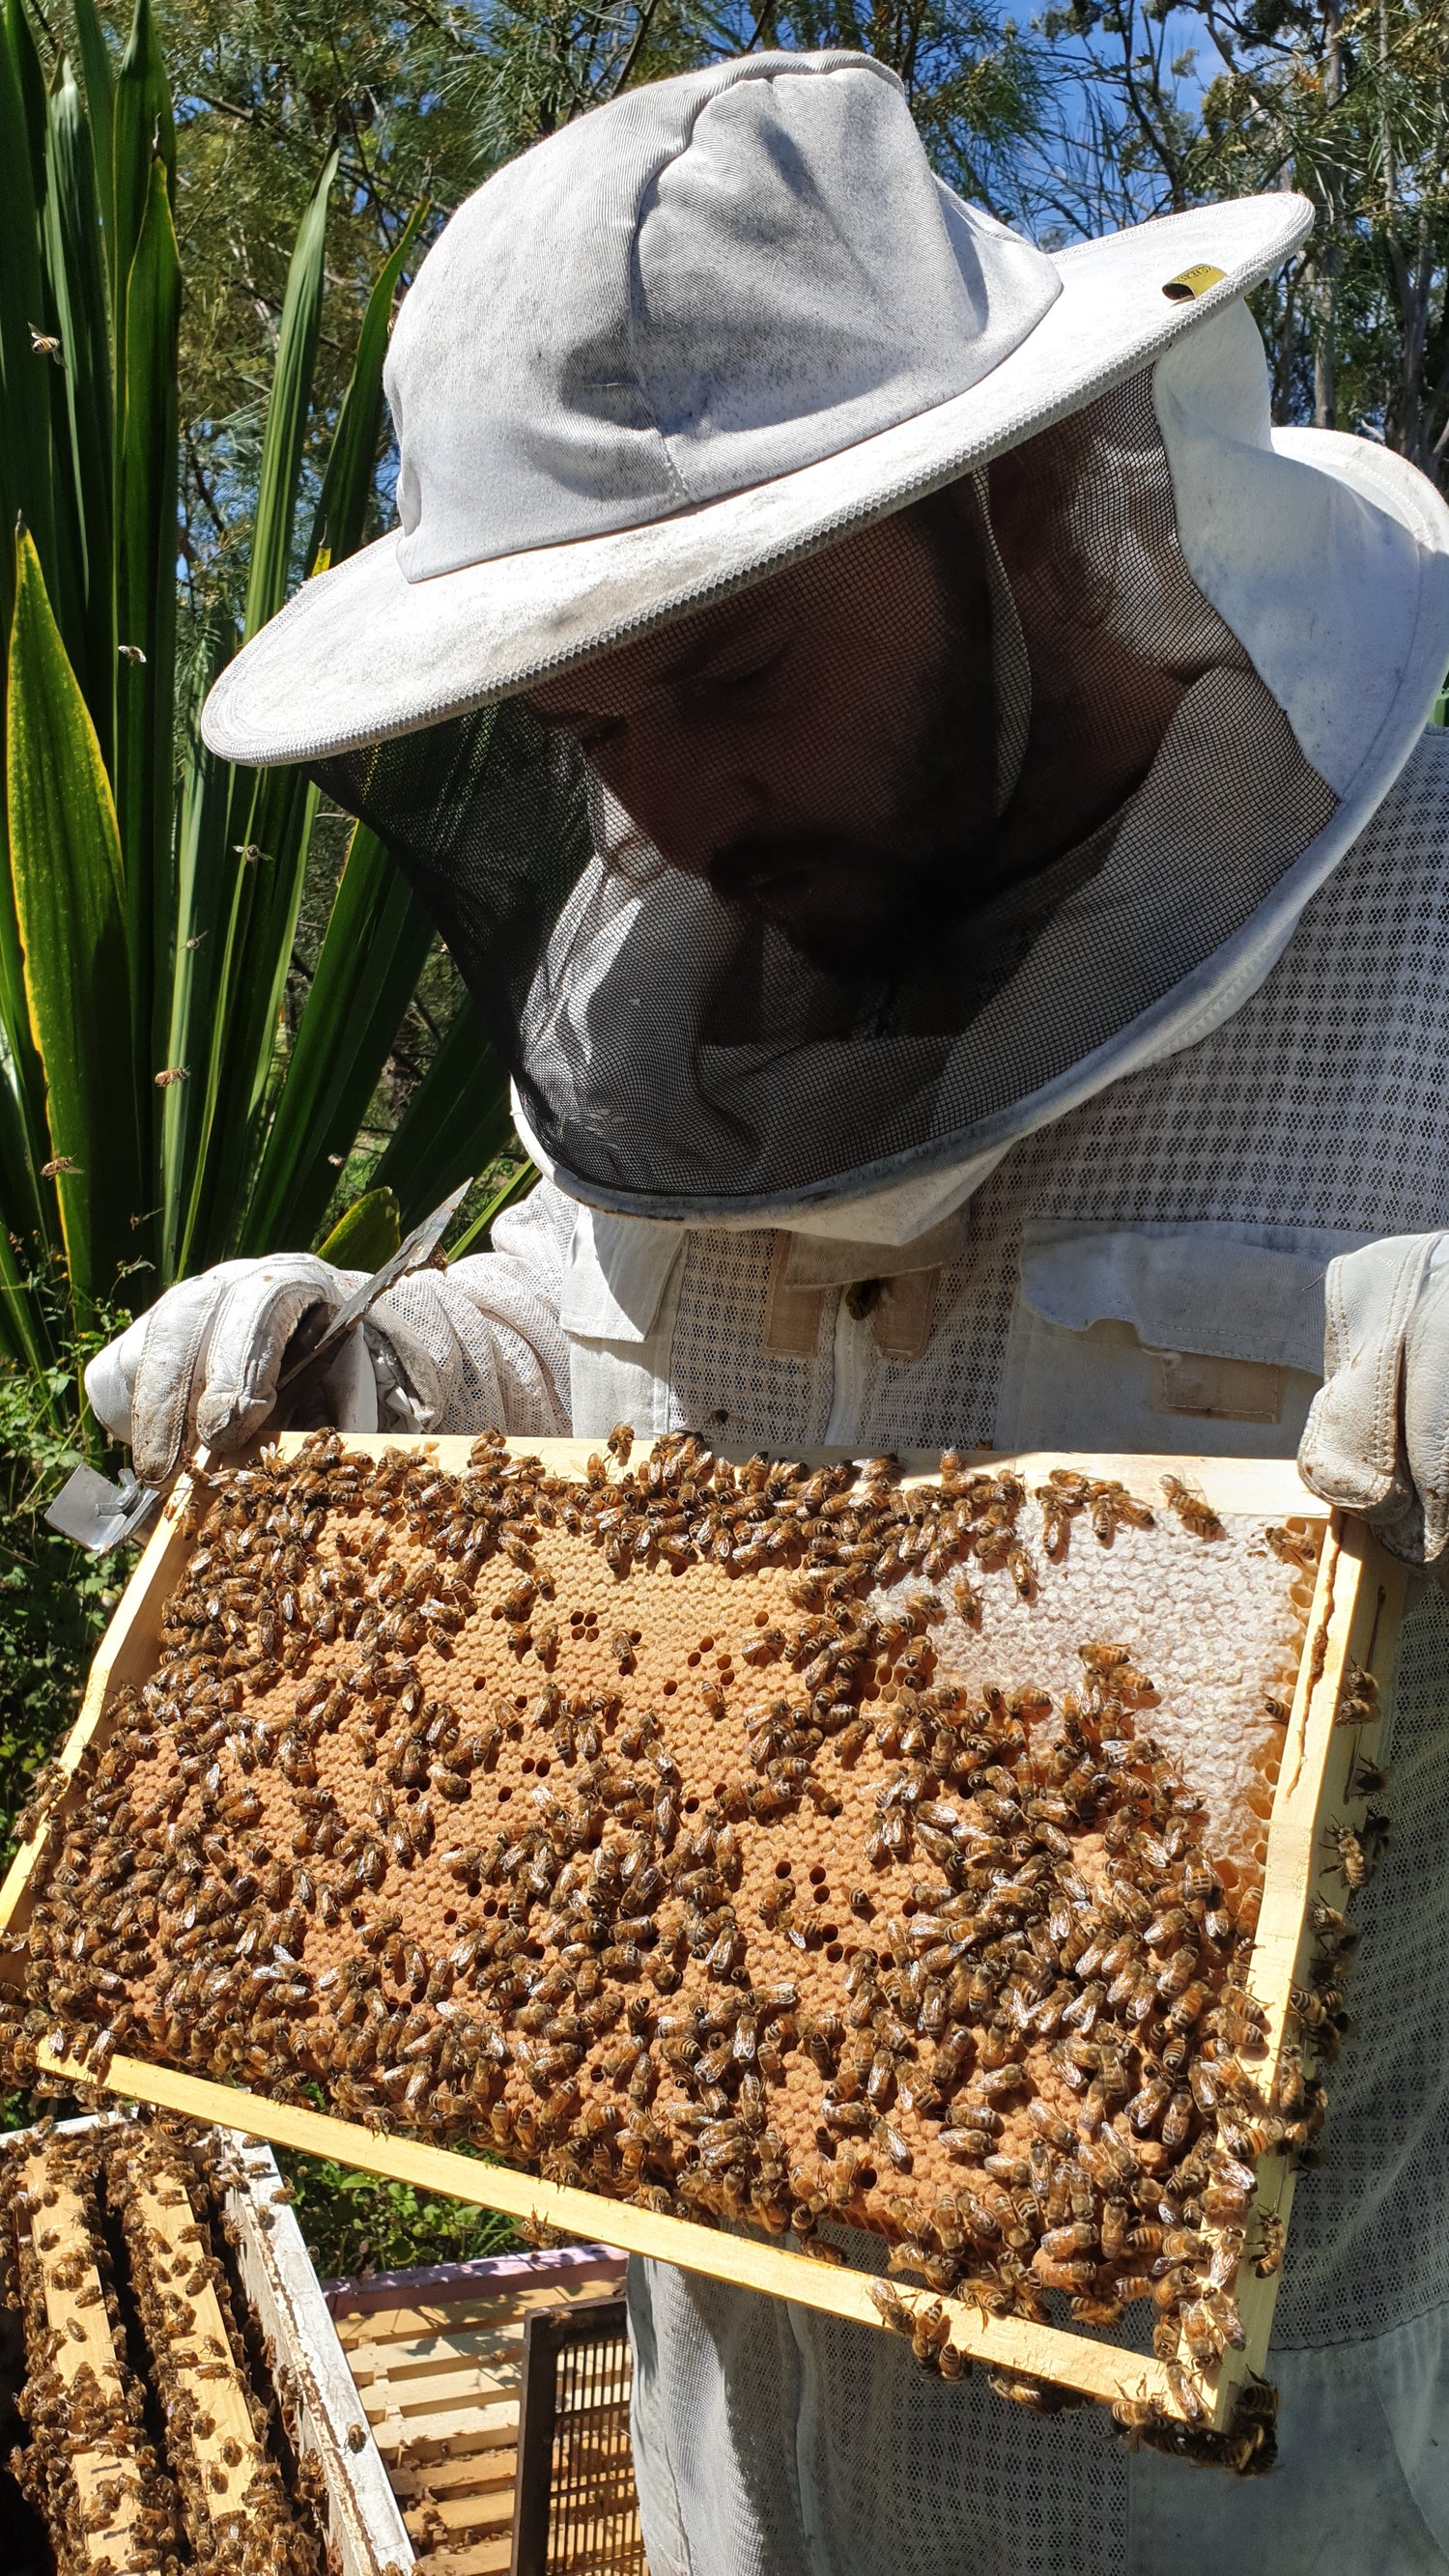 Bee keeper holding a frame of brood